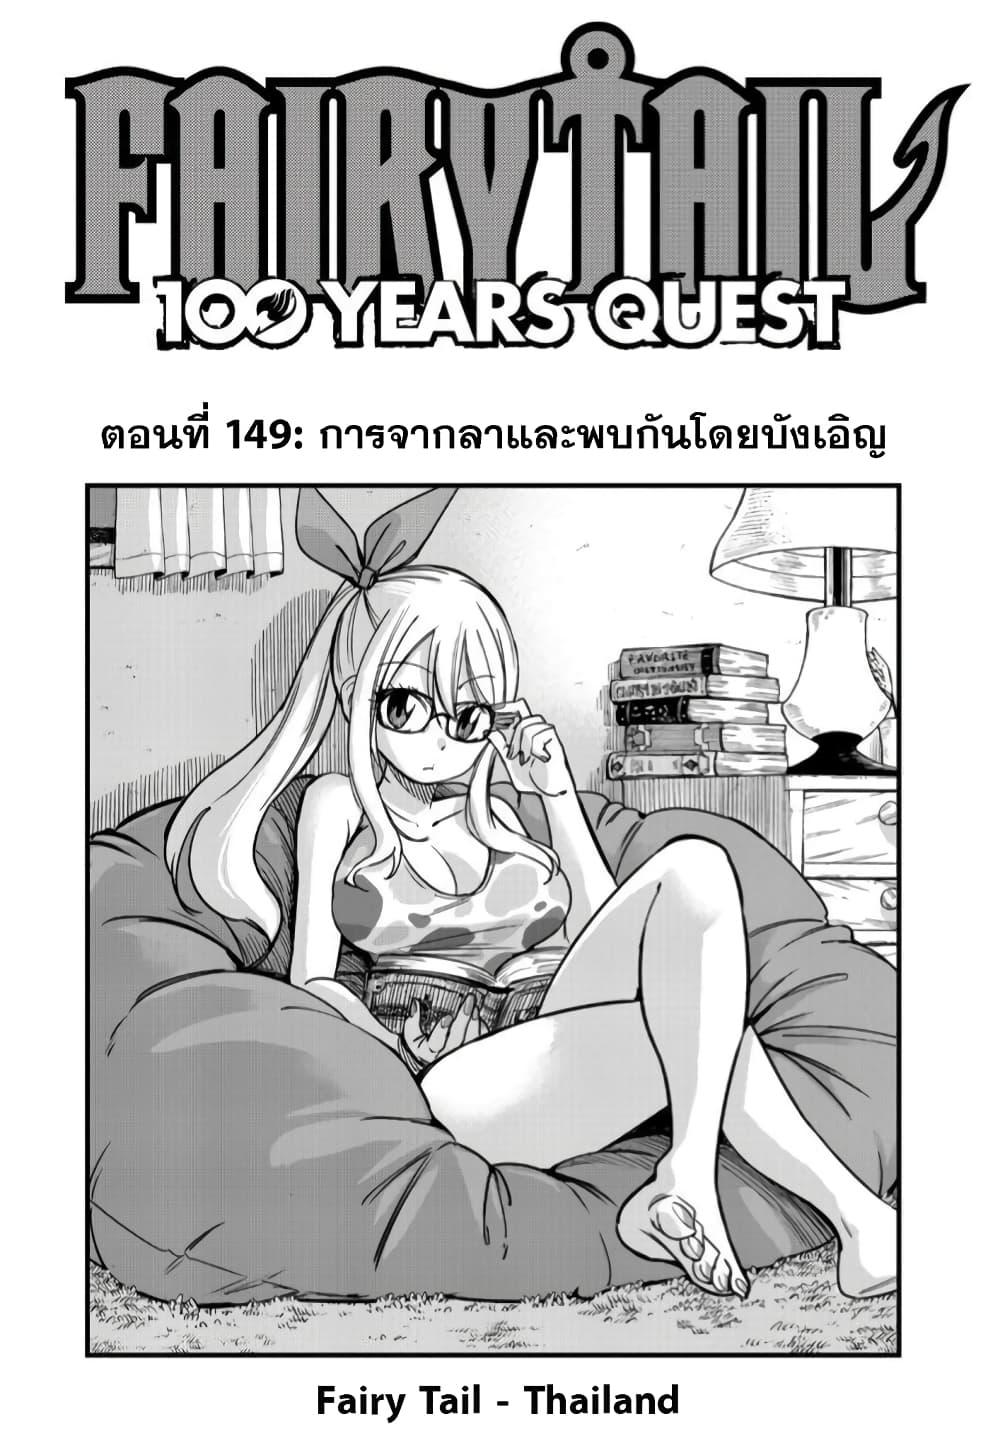 Fairy Tail 100 Years Quest ตอนที่ 149 (1)